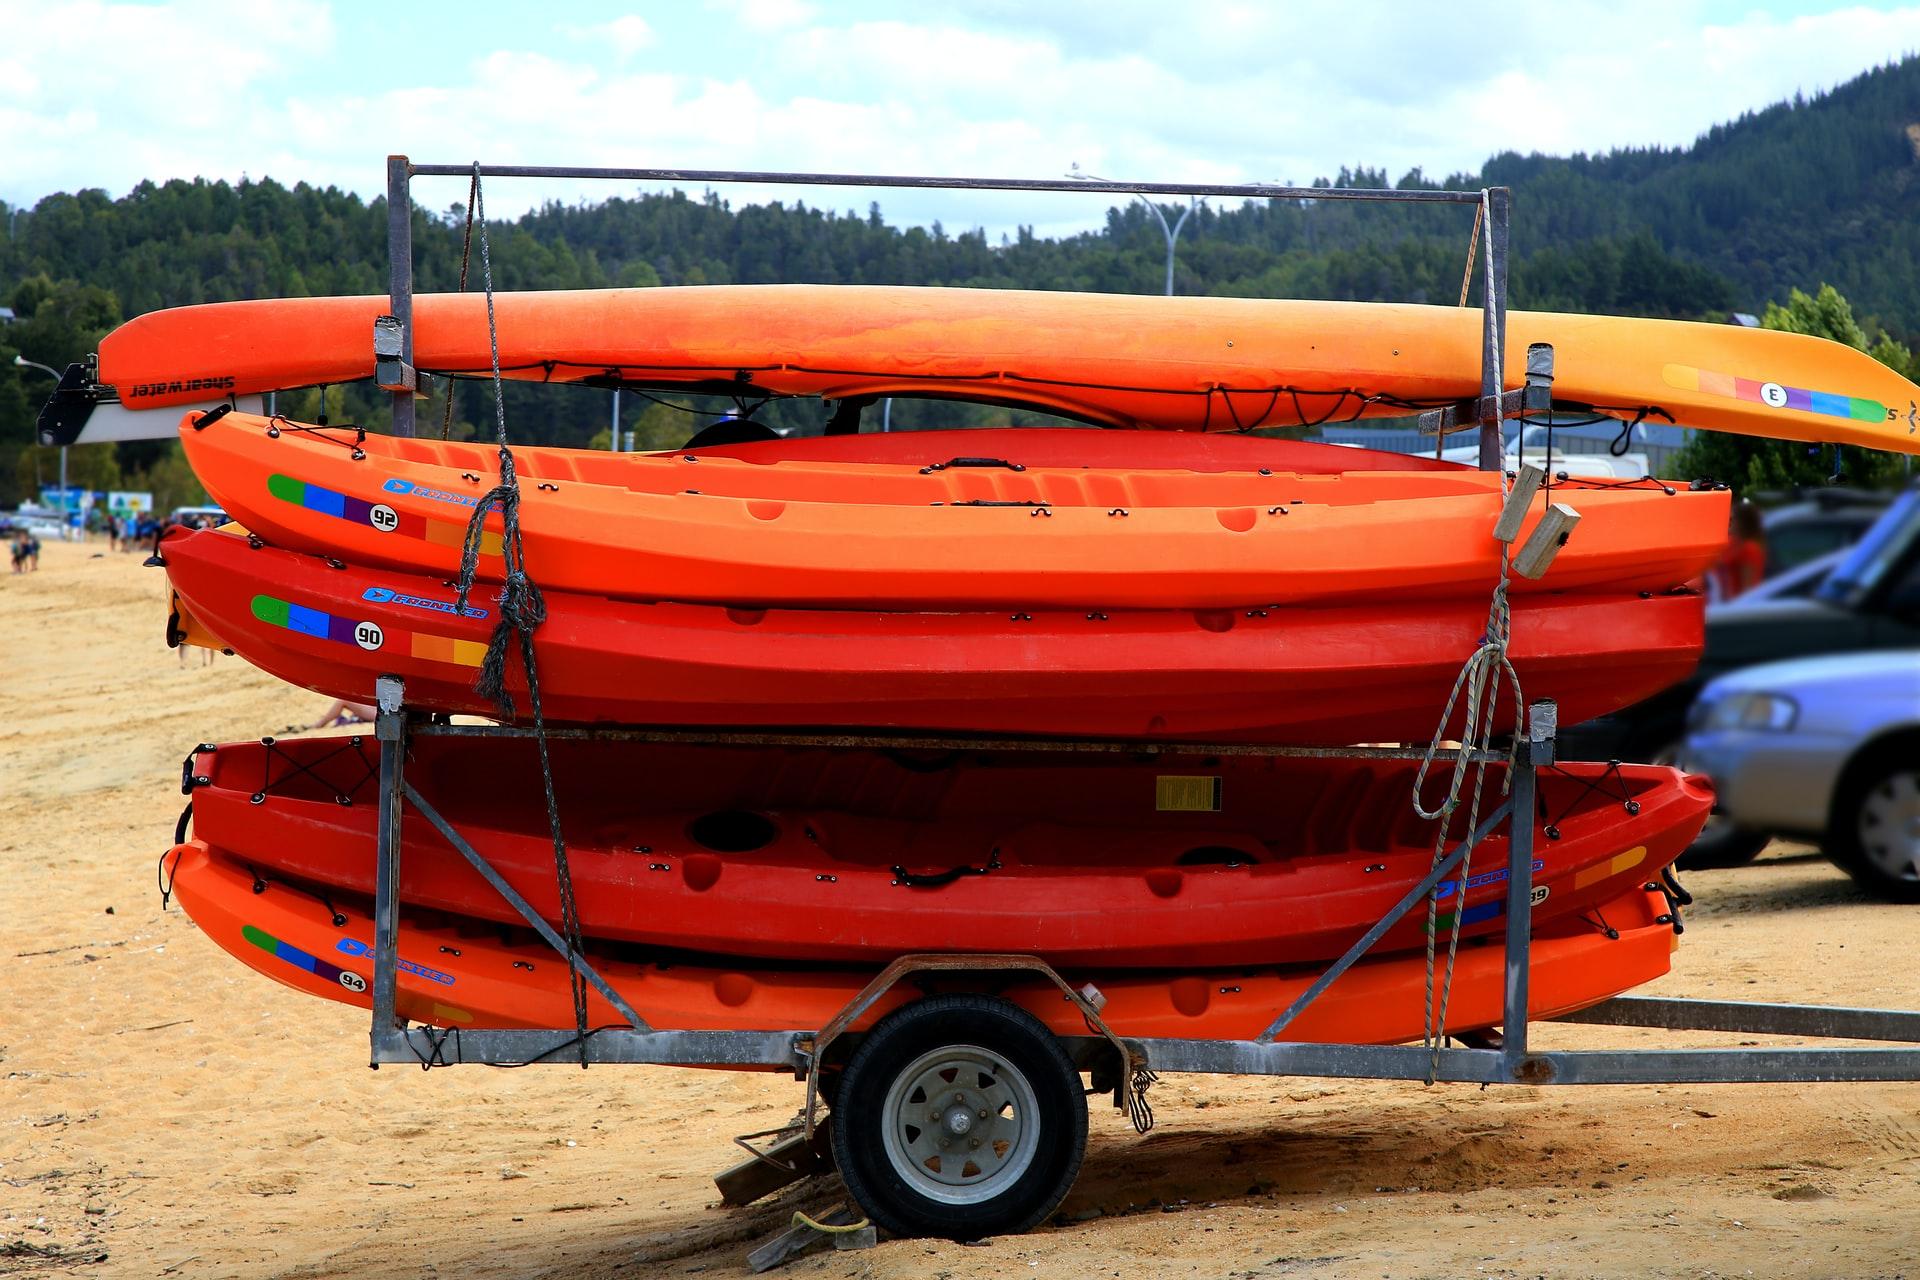 A trailer full of kayaks waiting to be towed.